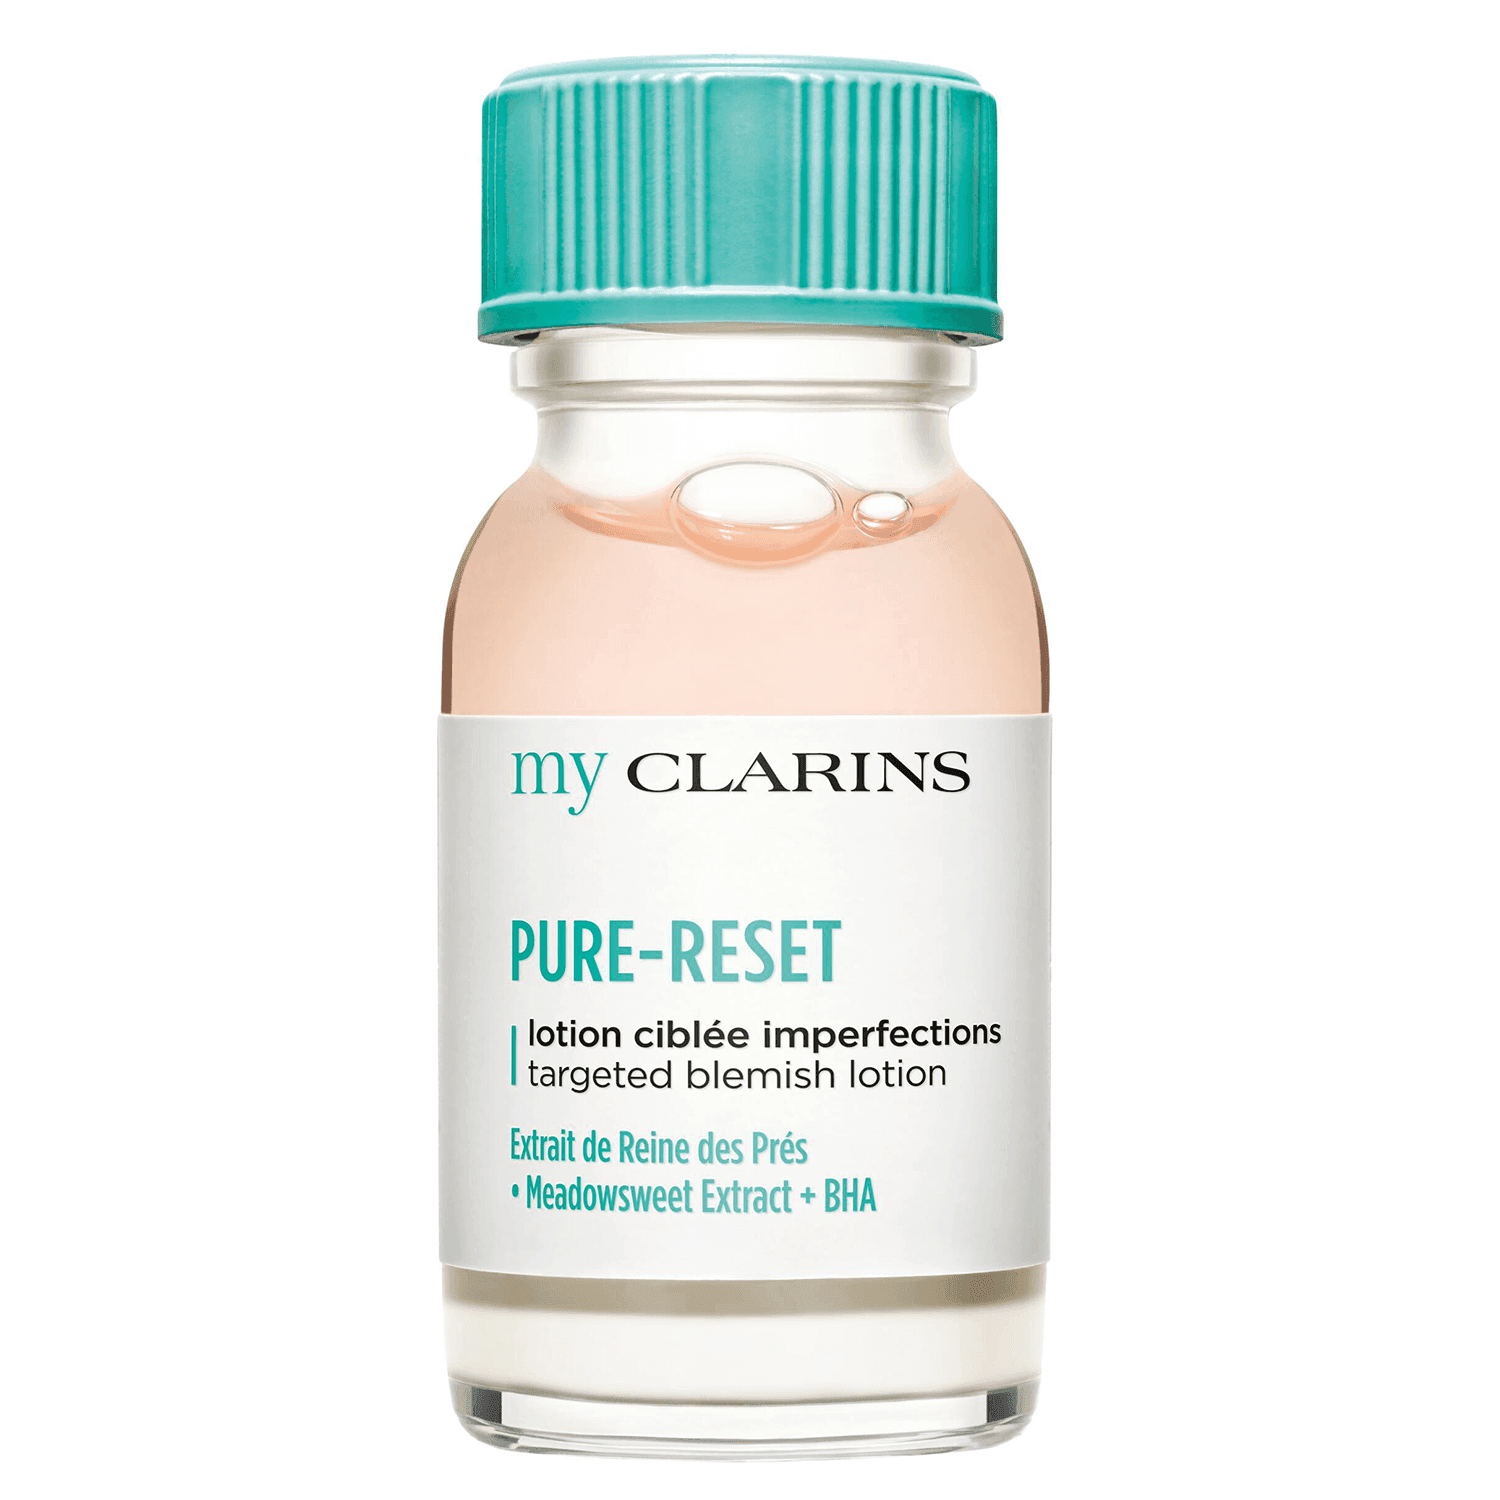 myClarins - PURE-RESET targeted blemish lotion